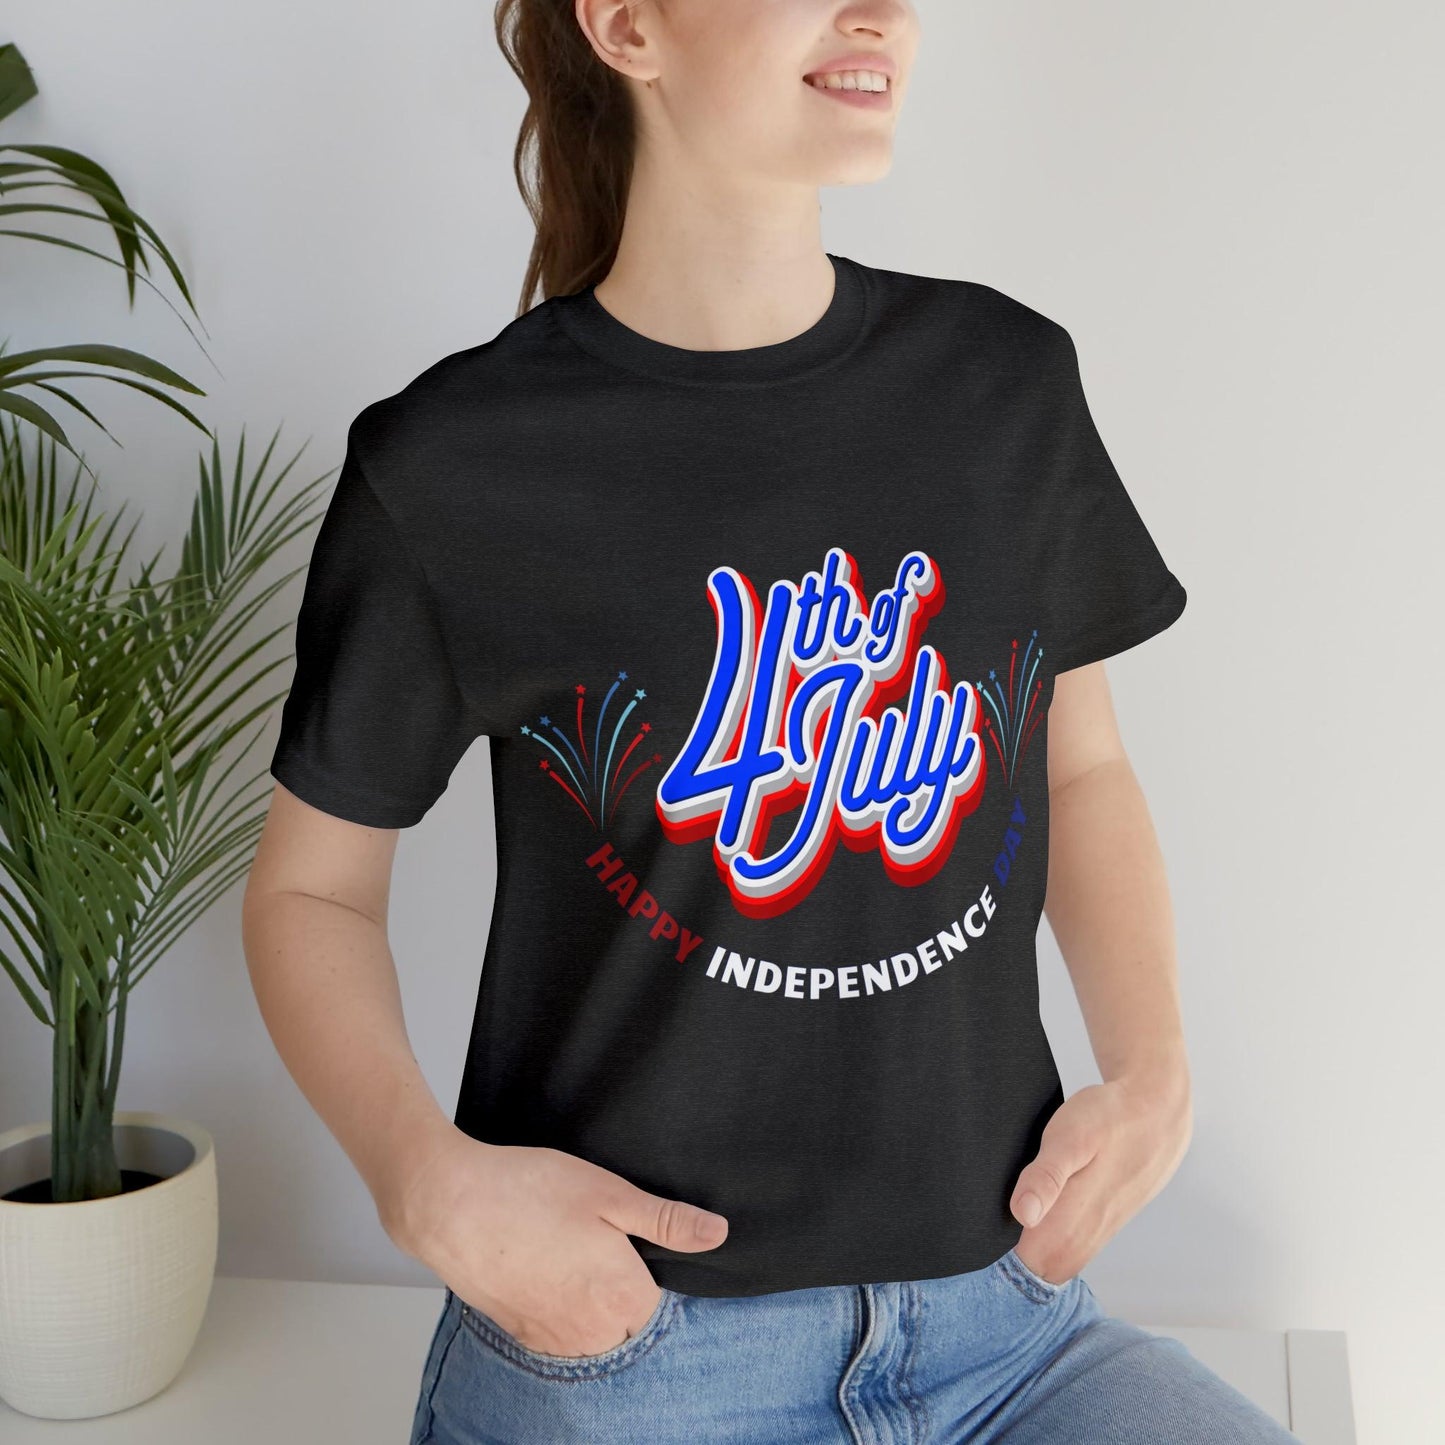 Celebrate Freedom with Patriotic Shirts: Happy Independence Day Shirt for Women and Men, USA Flag, Fireworks, and Freedom-inspired Designs - Giftsmojo